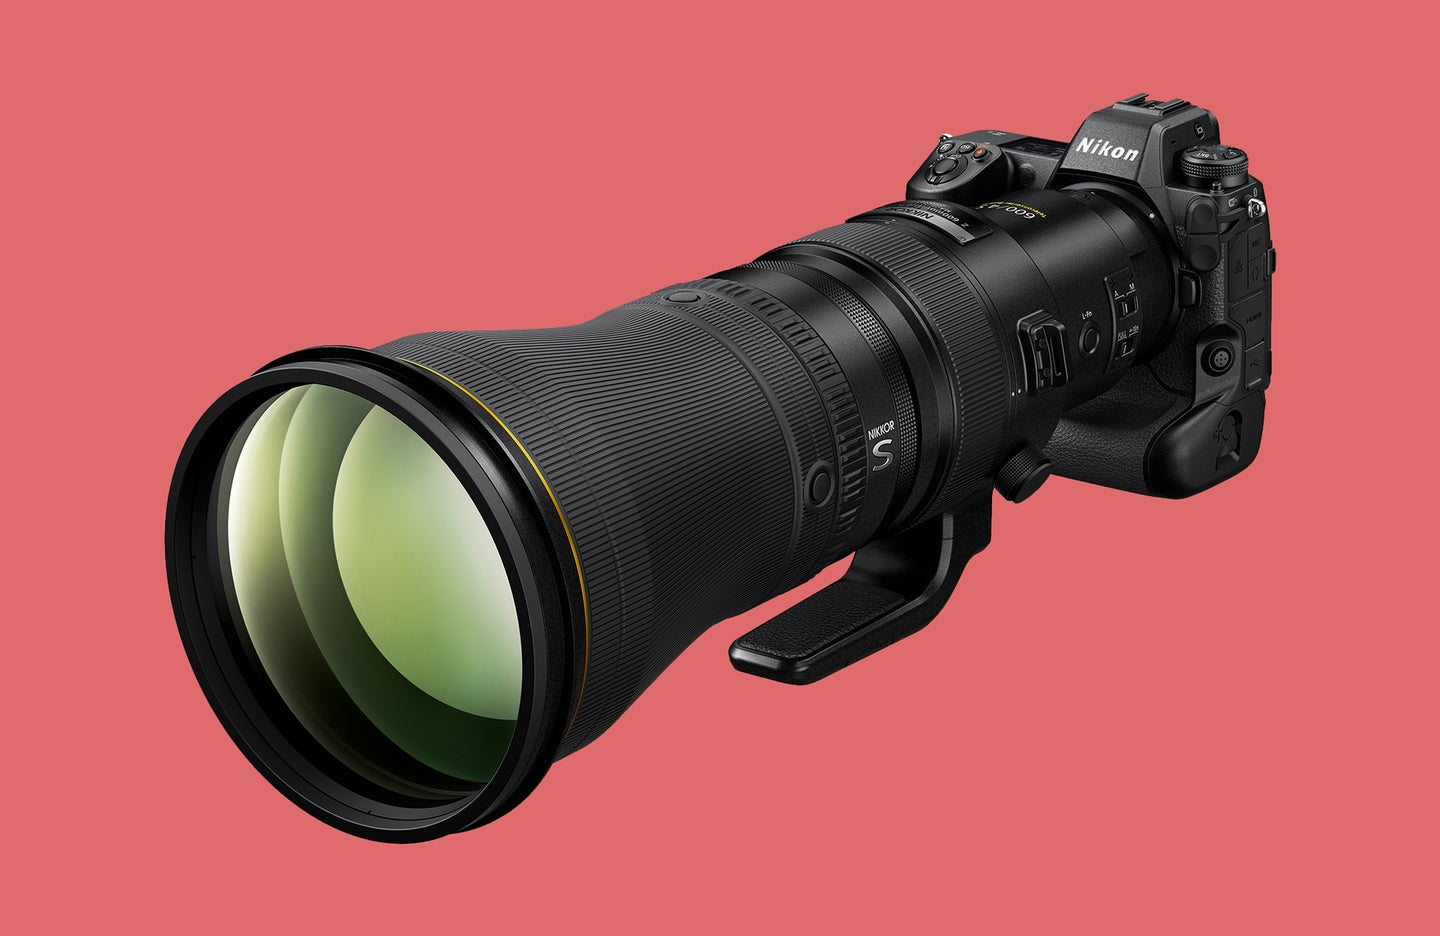 Nikon has announced the new 600mm f/4 super-telephoto lens for Z-mount cameras.